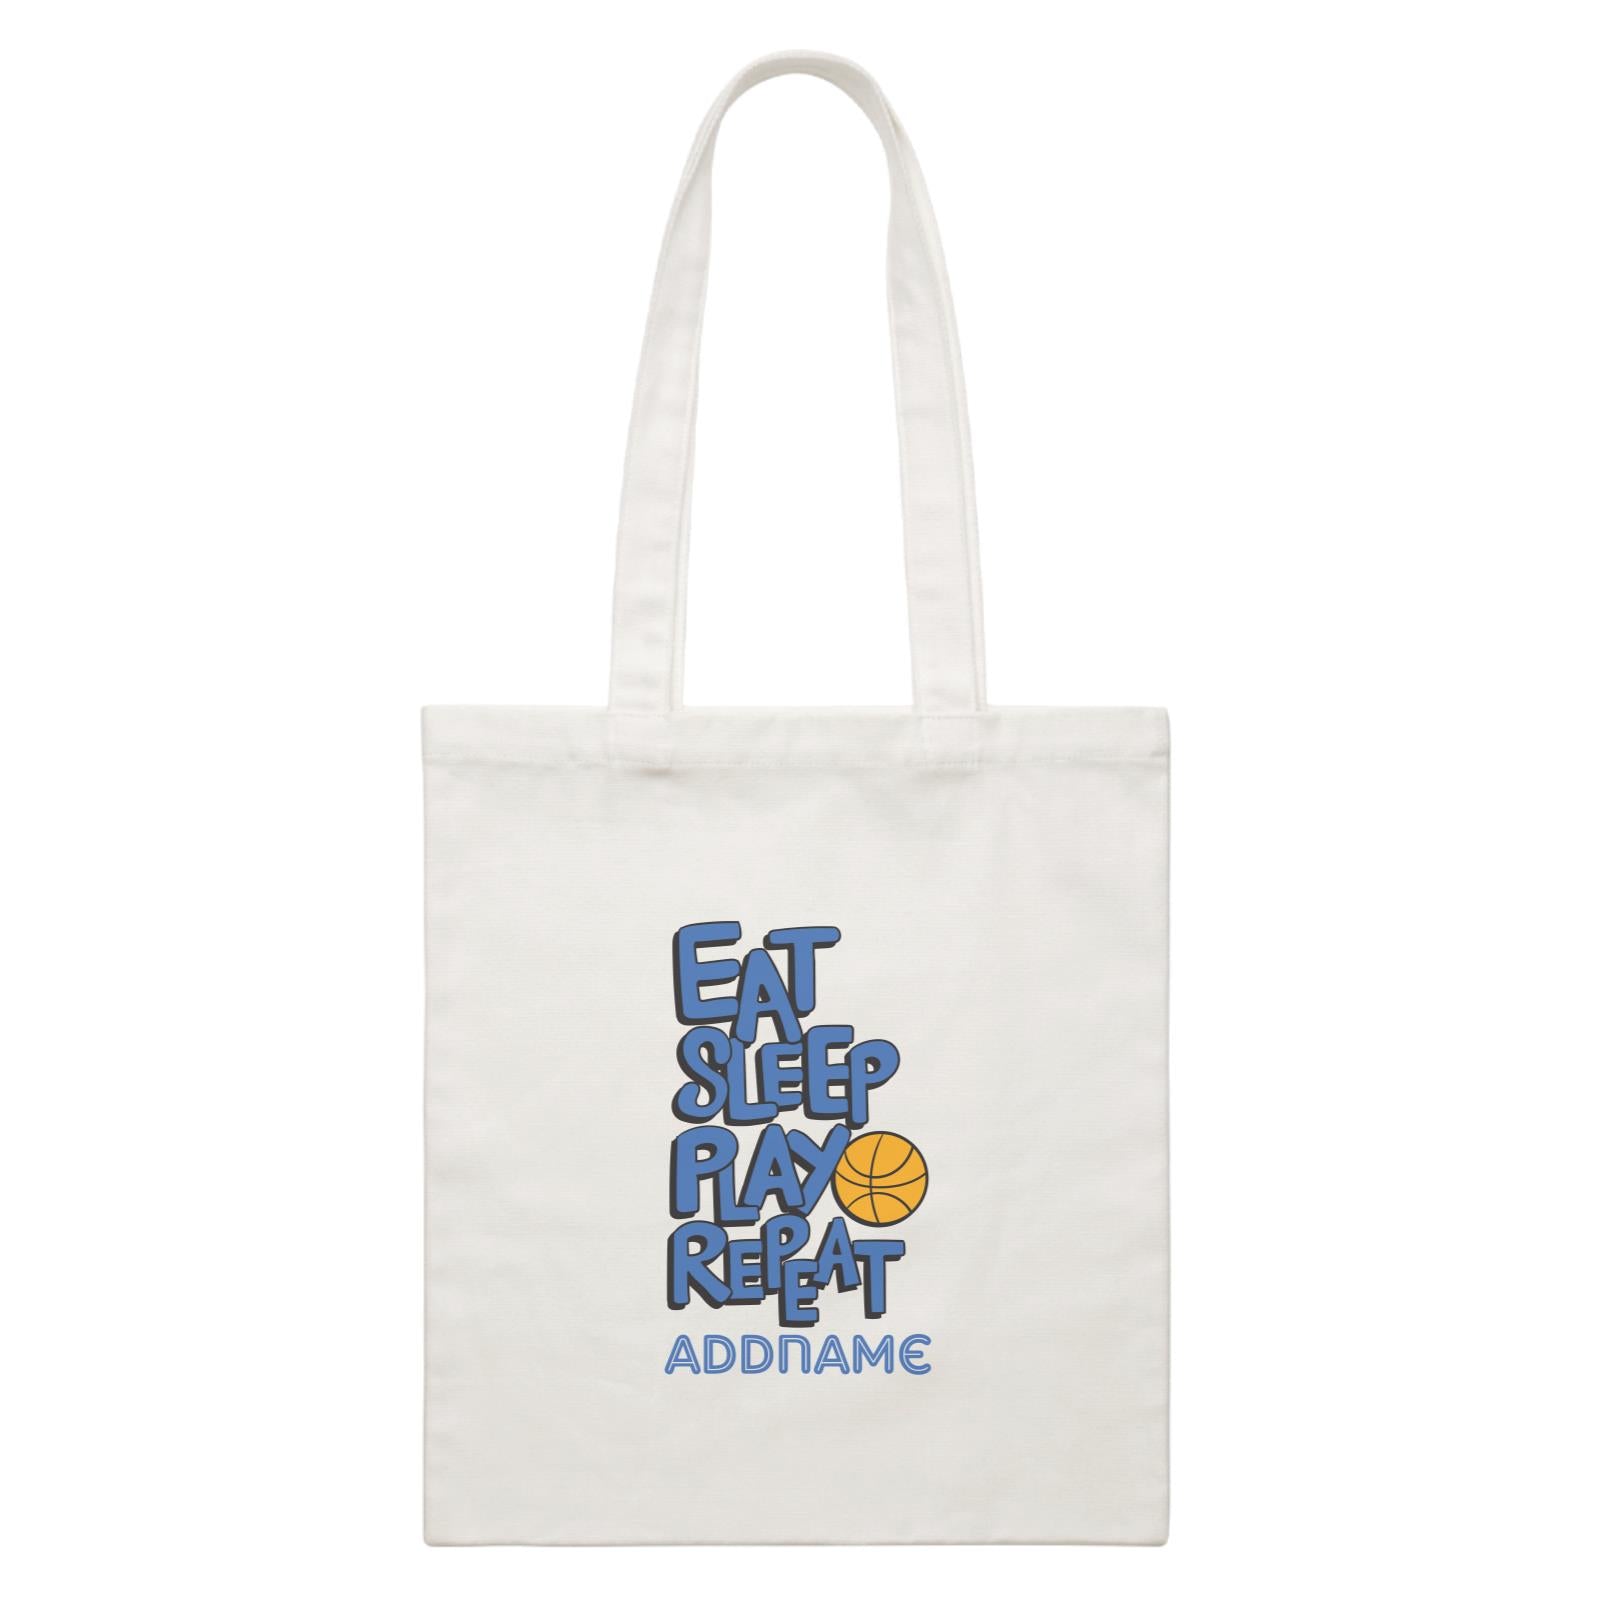 Cool Cute Words Eat Sleep Play Repeat Addname White Canvas Bag